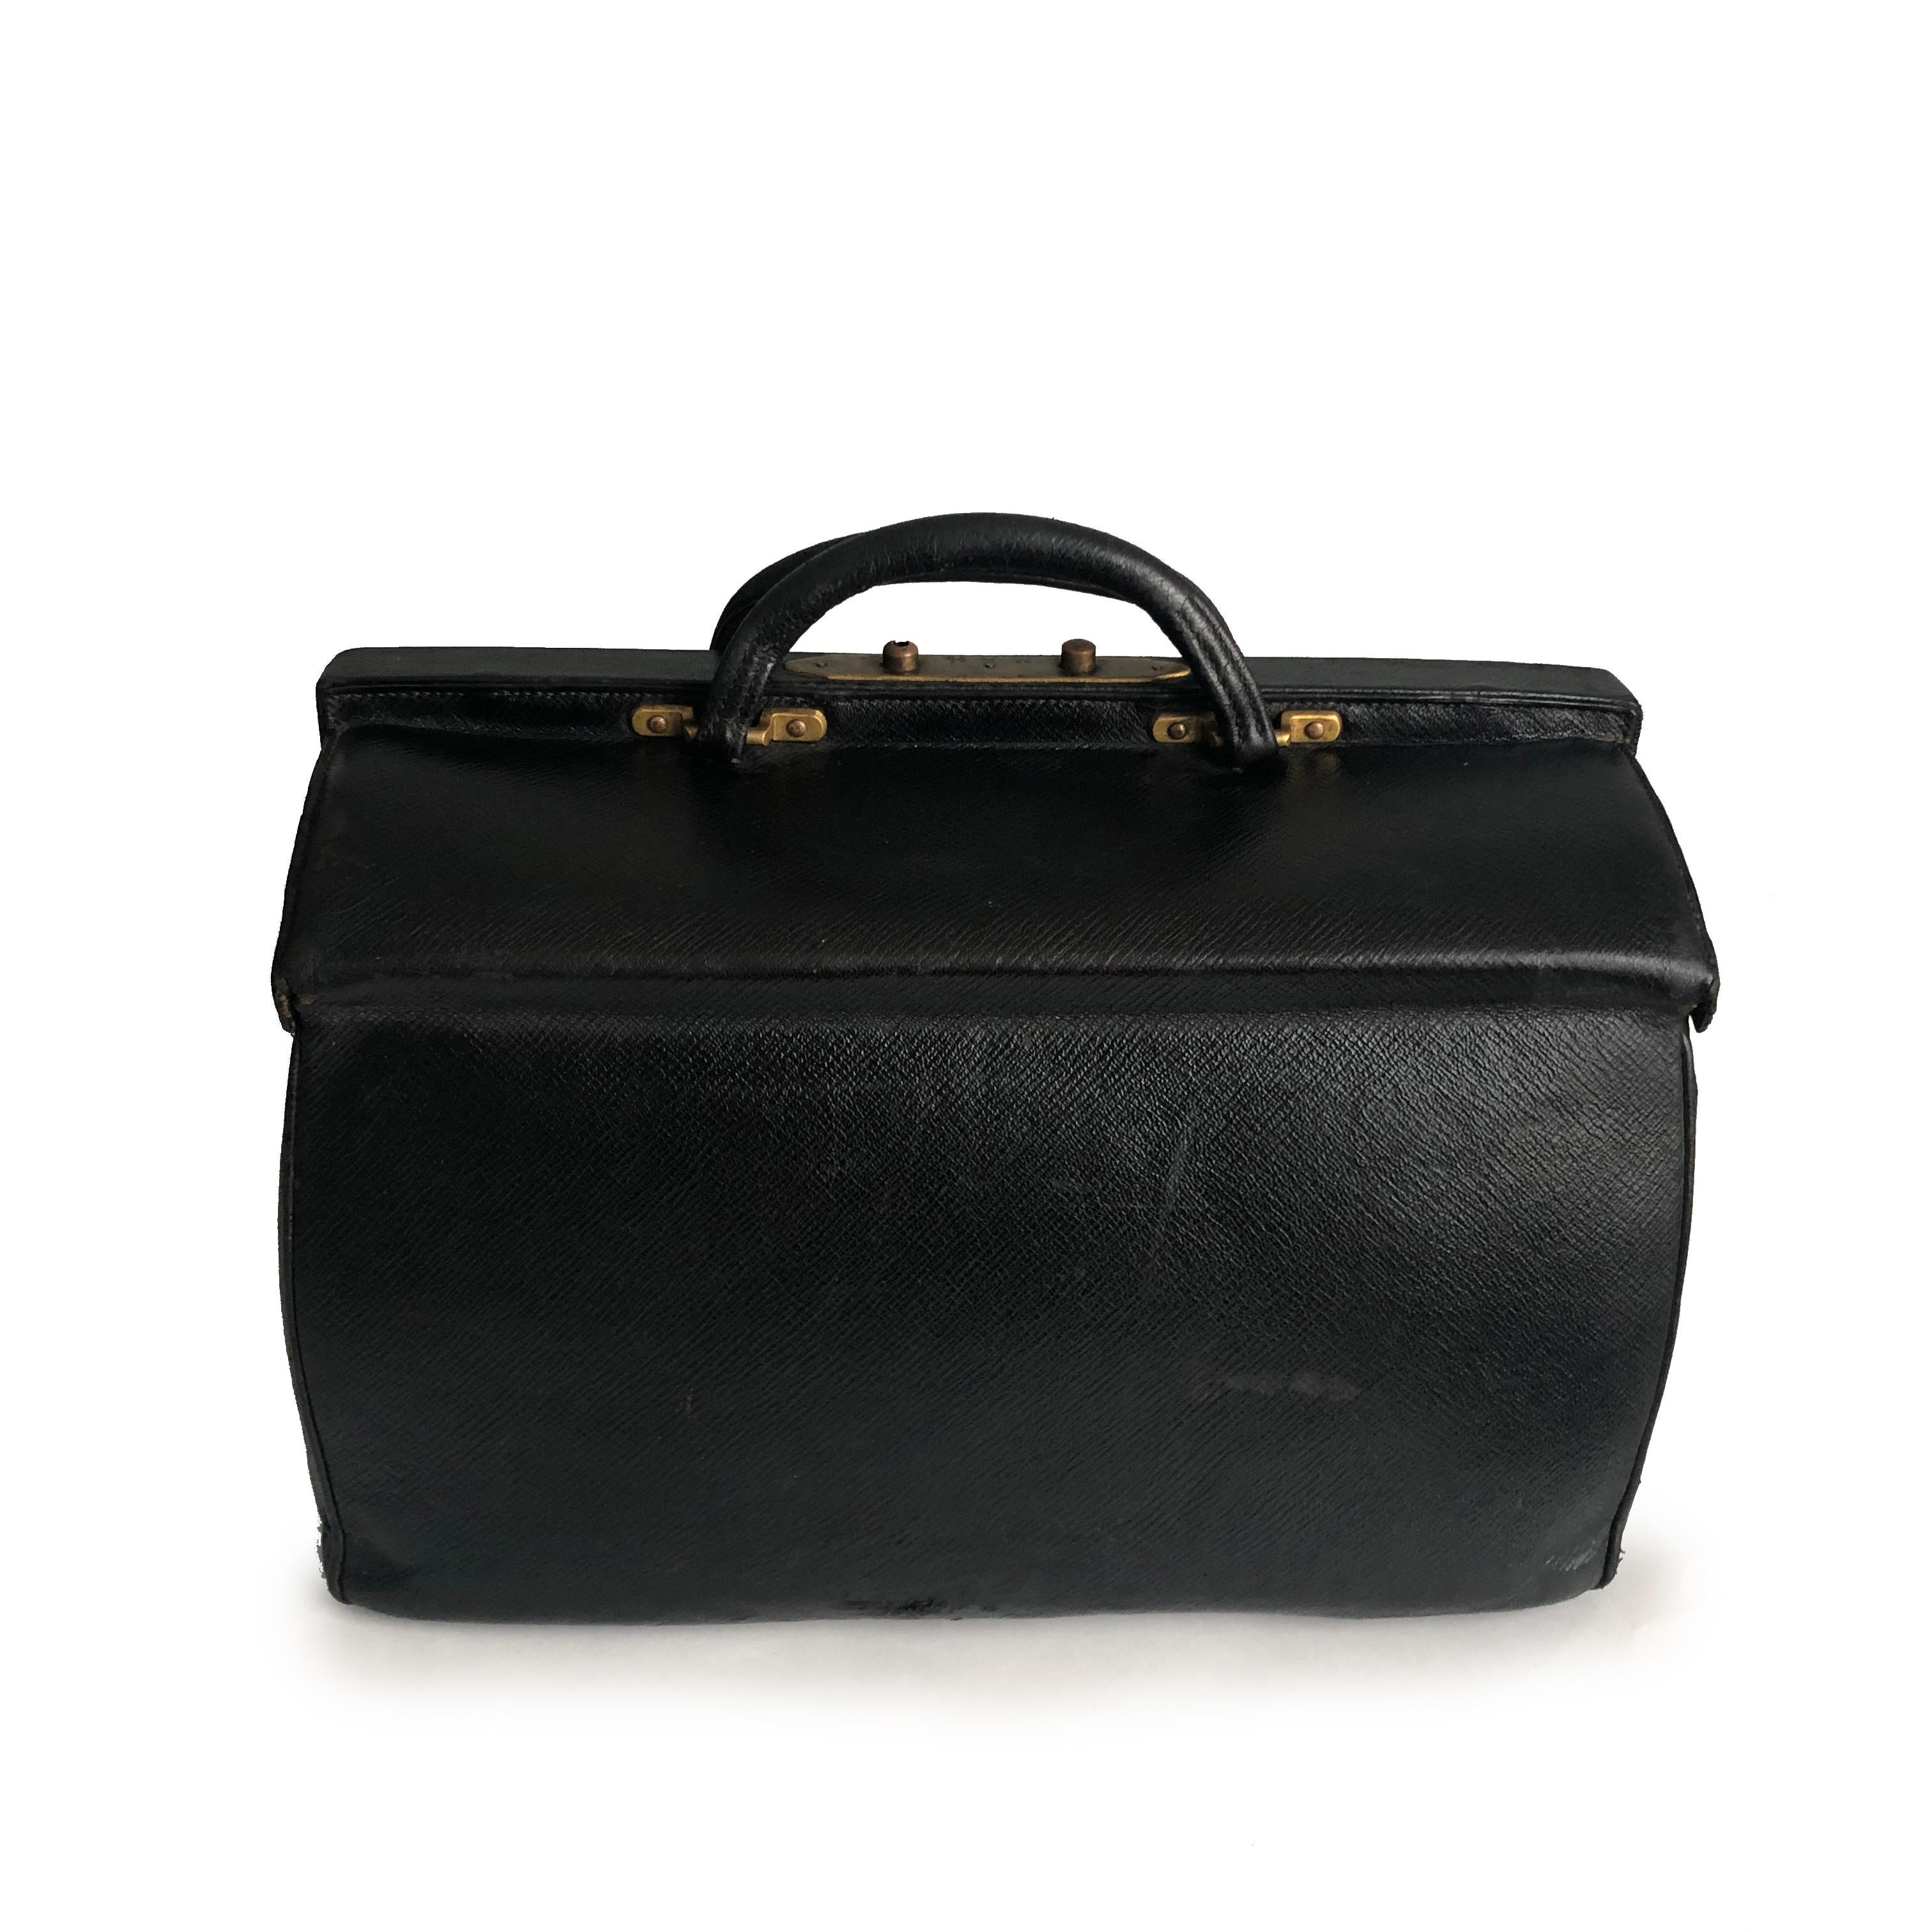 Antique Louis Vuitton Sac Cabine Black Doctors Bag, likely made in the early 20th C.  Made from black textured grain leather, it opens like a doctor's bag with two hinged pieces and features double top handles.  It's lined in red leather with two